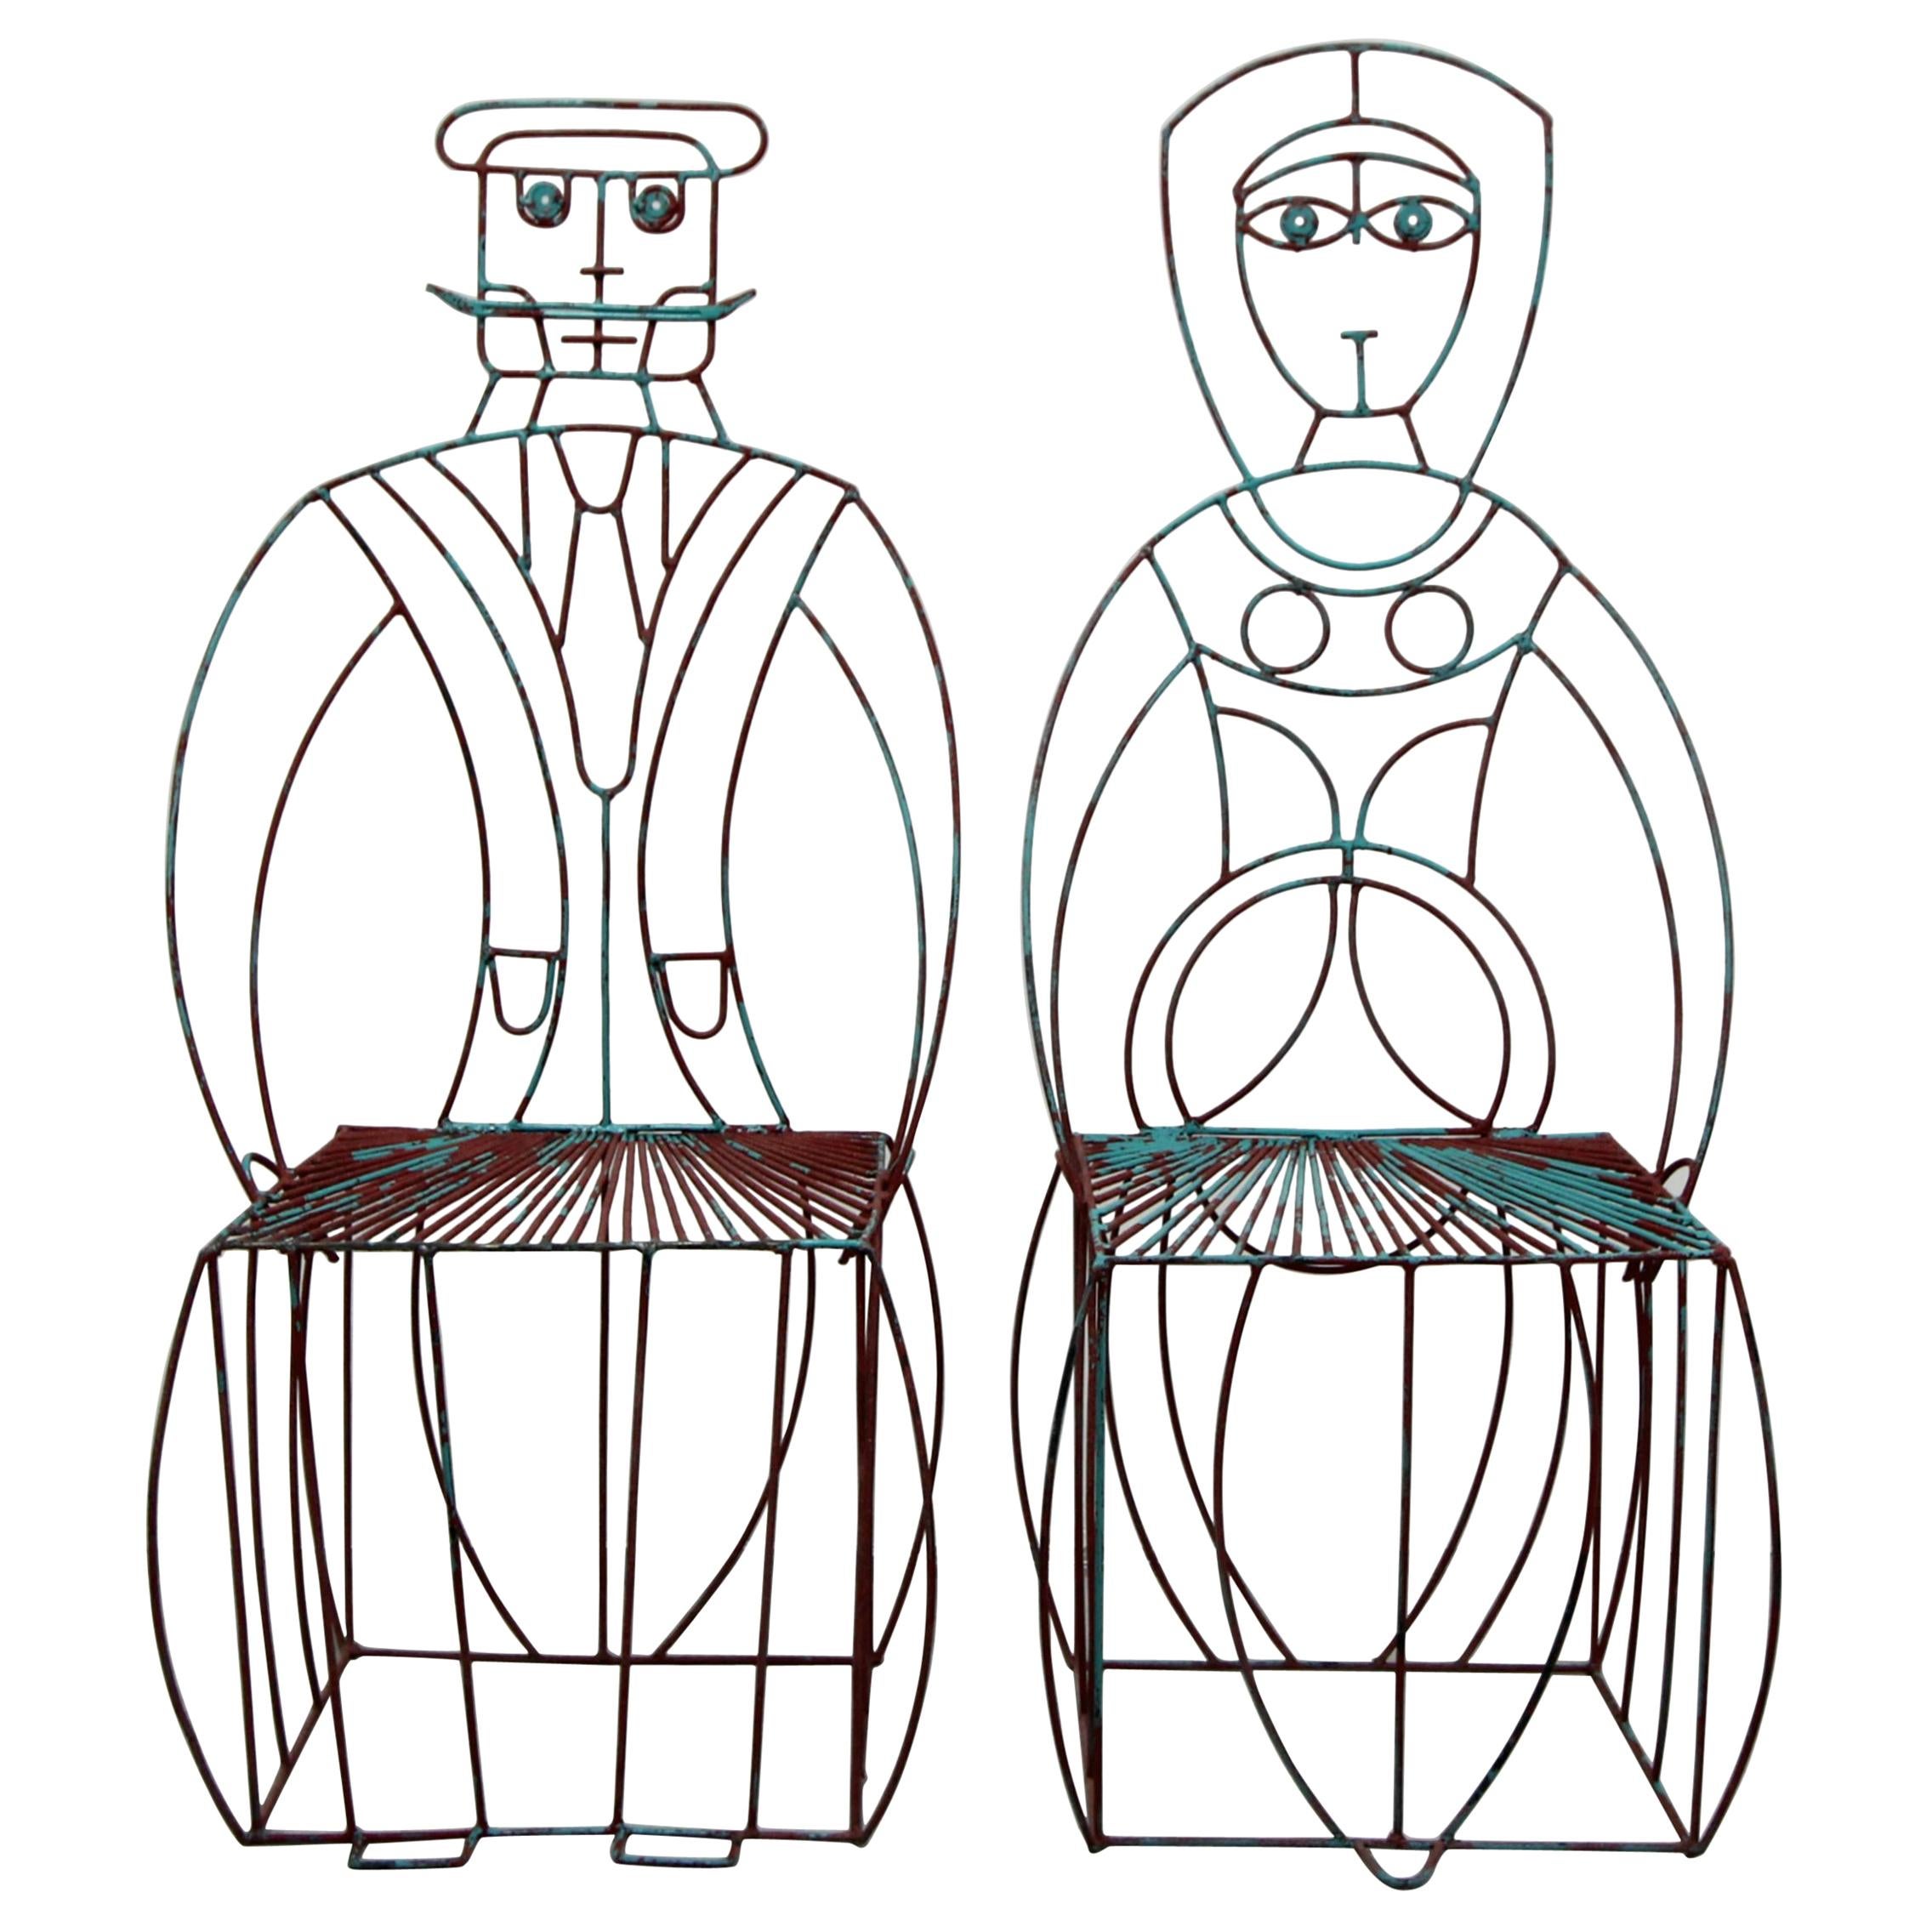 Pair of Midcentury Figural His and Hers Steel Wire Patio Chairs by John Risley